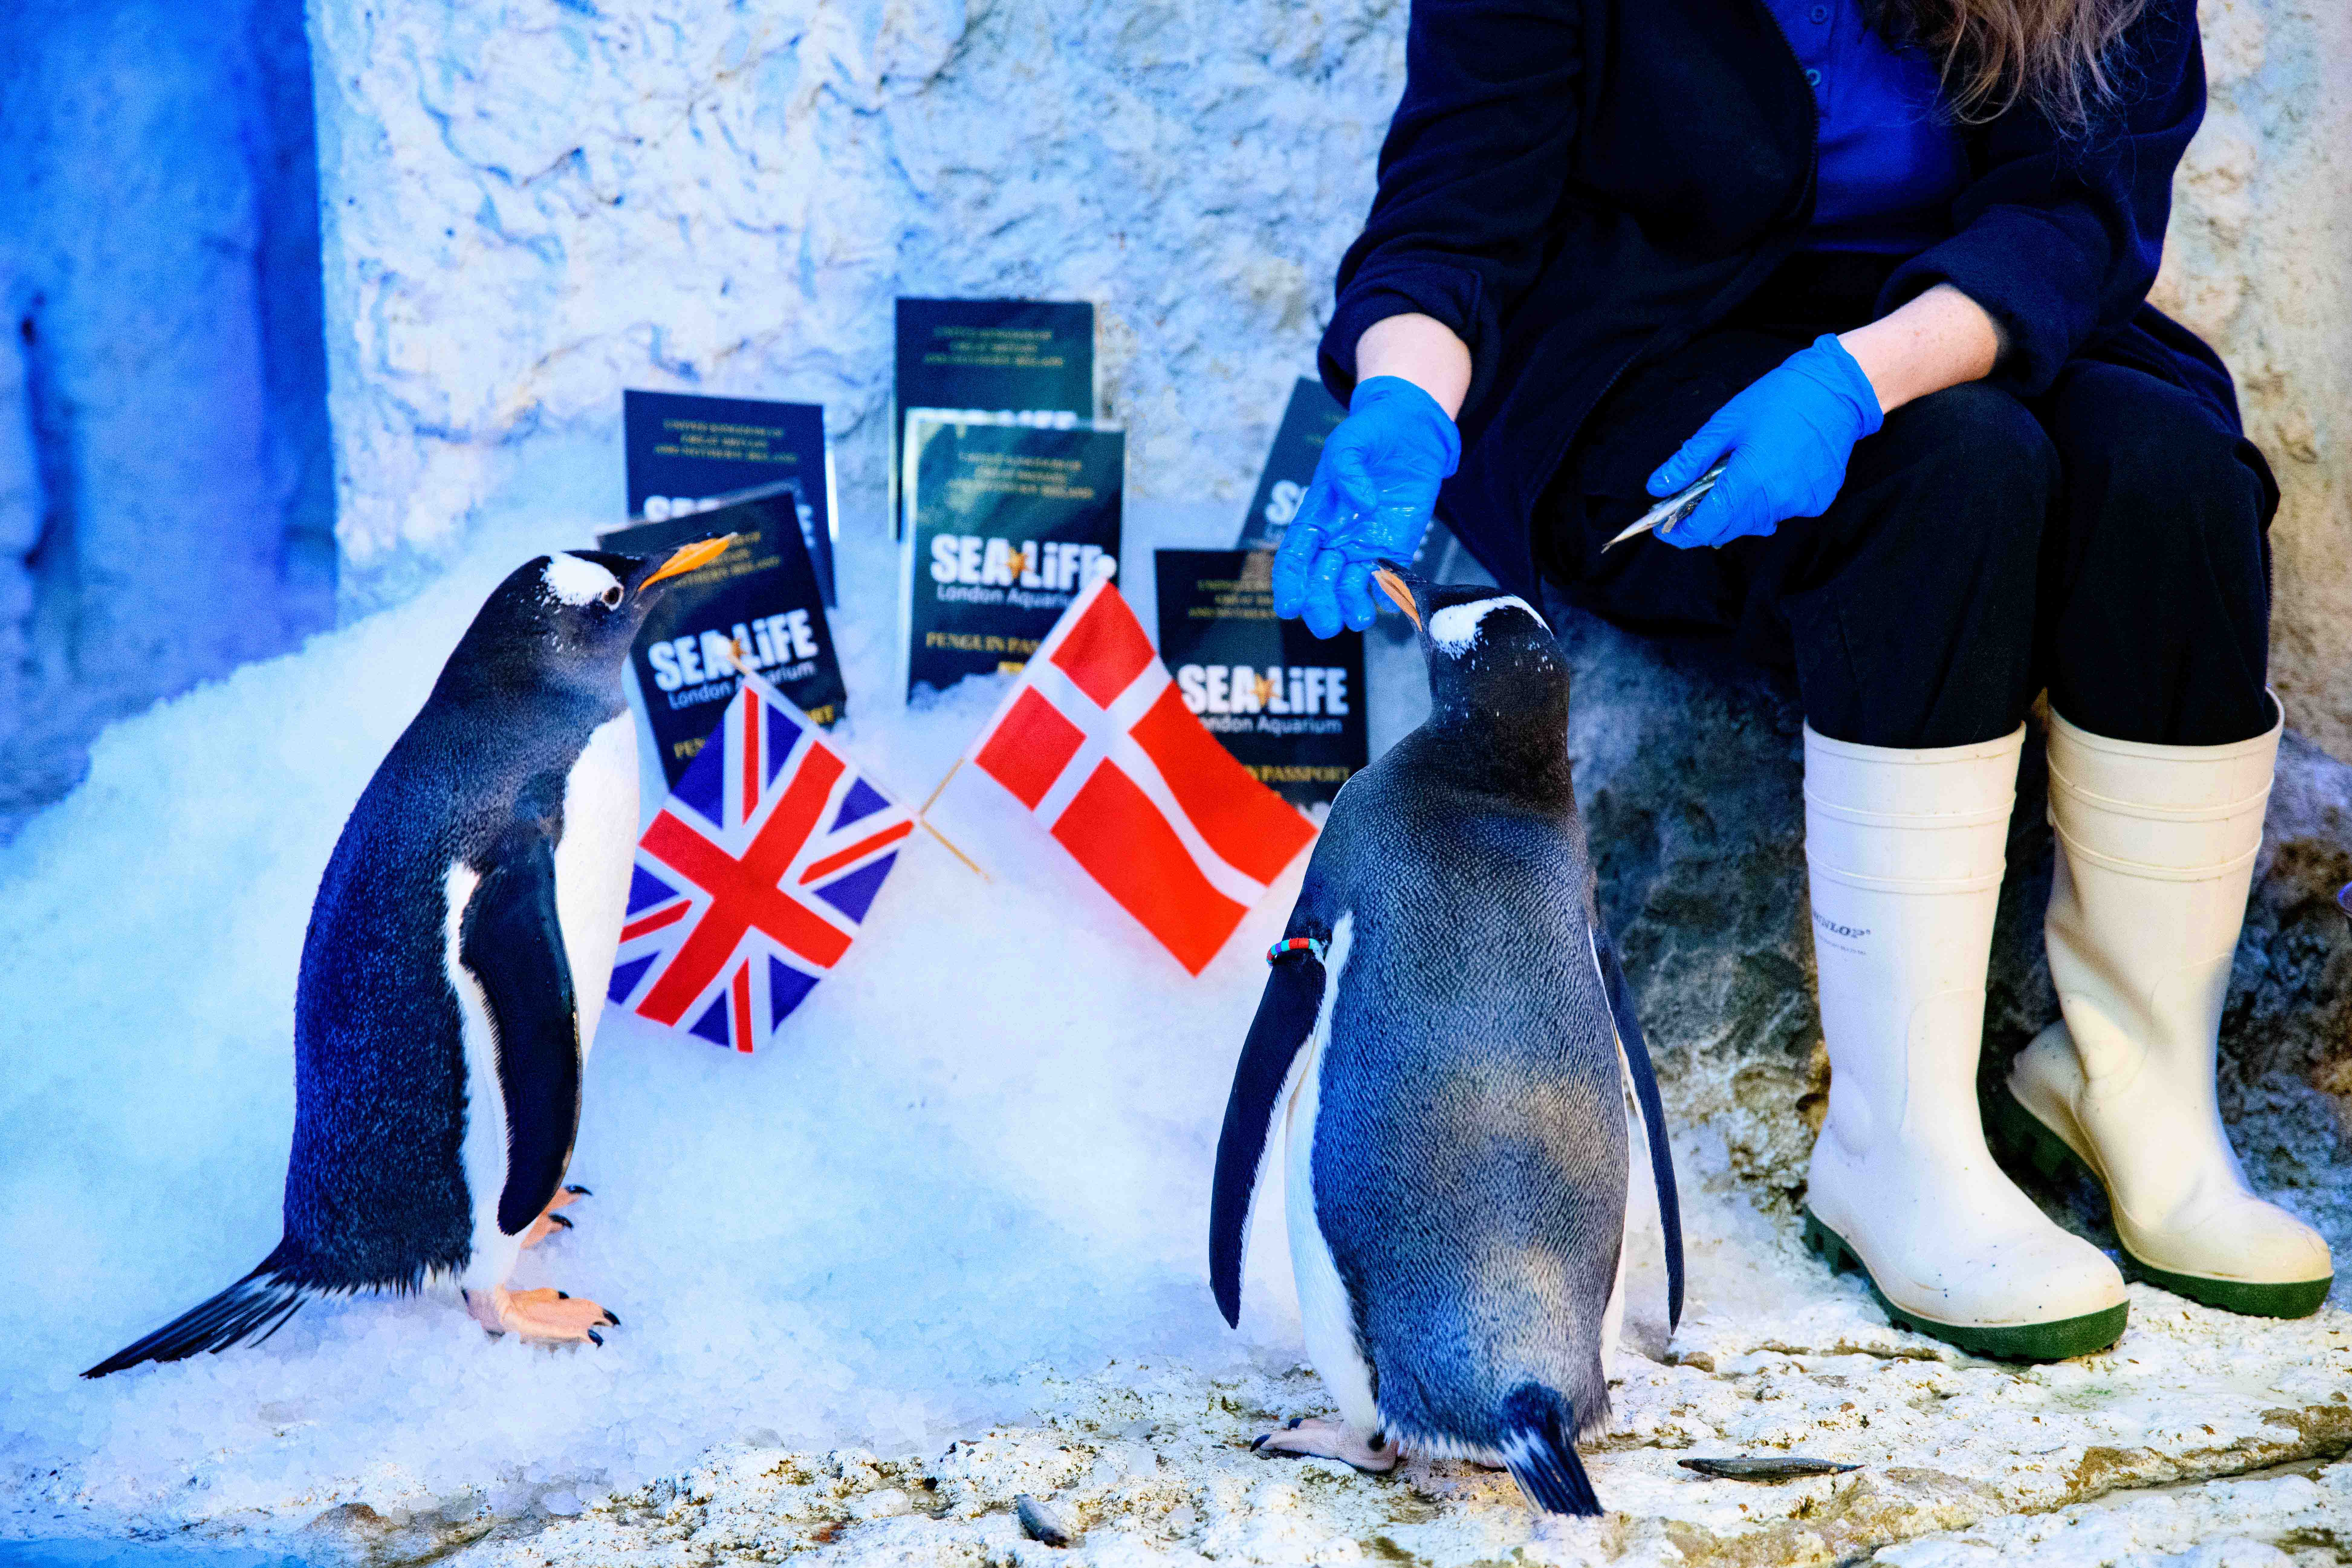 Populations of Gentoo penguins have declined rapidly in recent years owing to the birds’ sensitive breeding nature and damage to their habitats from tourism, pollution and the illegal collection of their eggs. (SEA LIFE London Aquarium/PA)